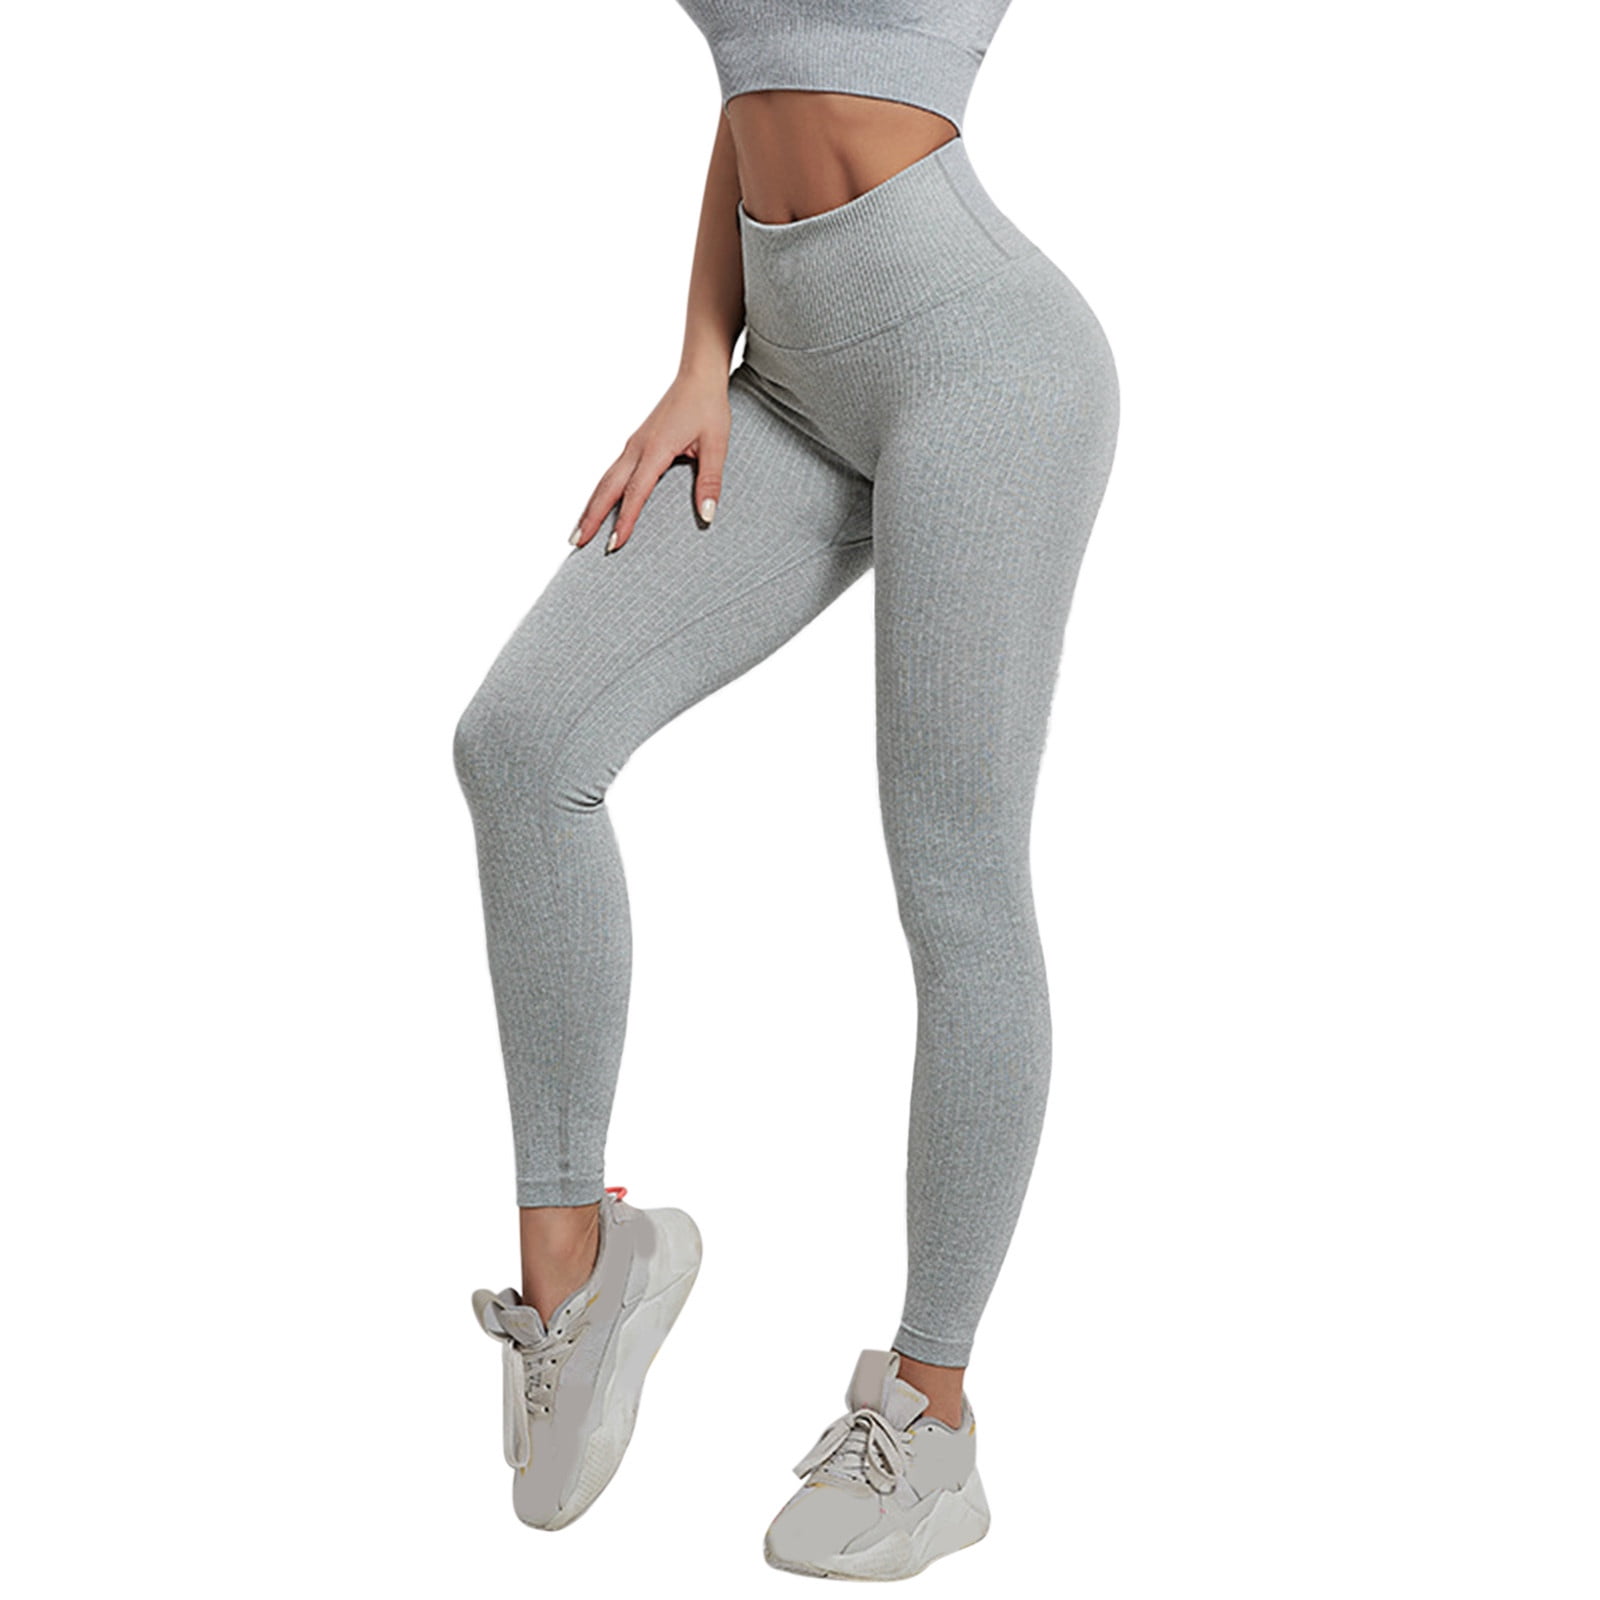 DISOLVE Present Super Soft Lightweight Leggings - for Women - Yoga Pants,  Workout Clothes Free Size (28 Till 32) Pack of 1(Grey)